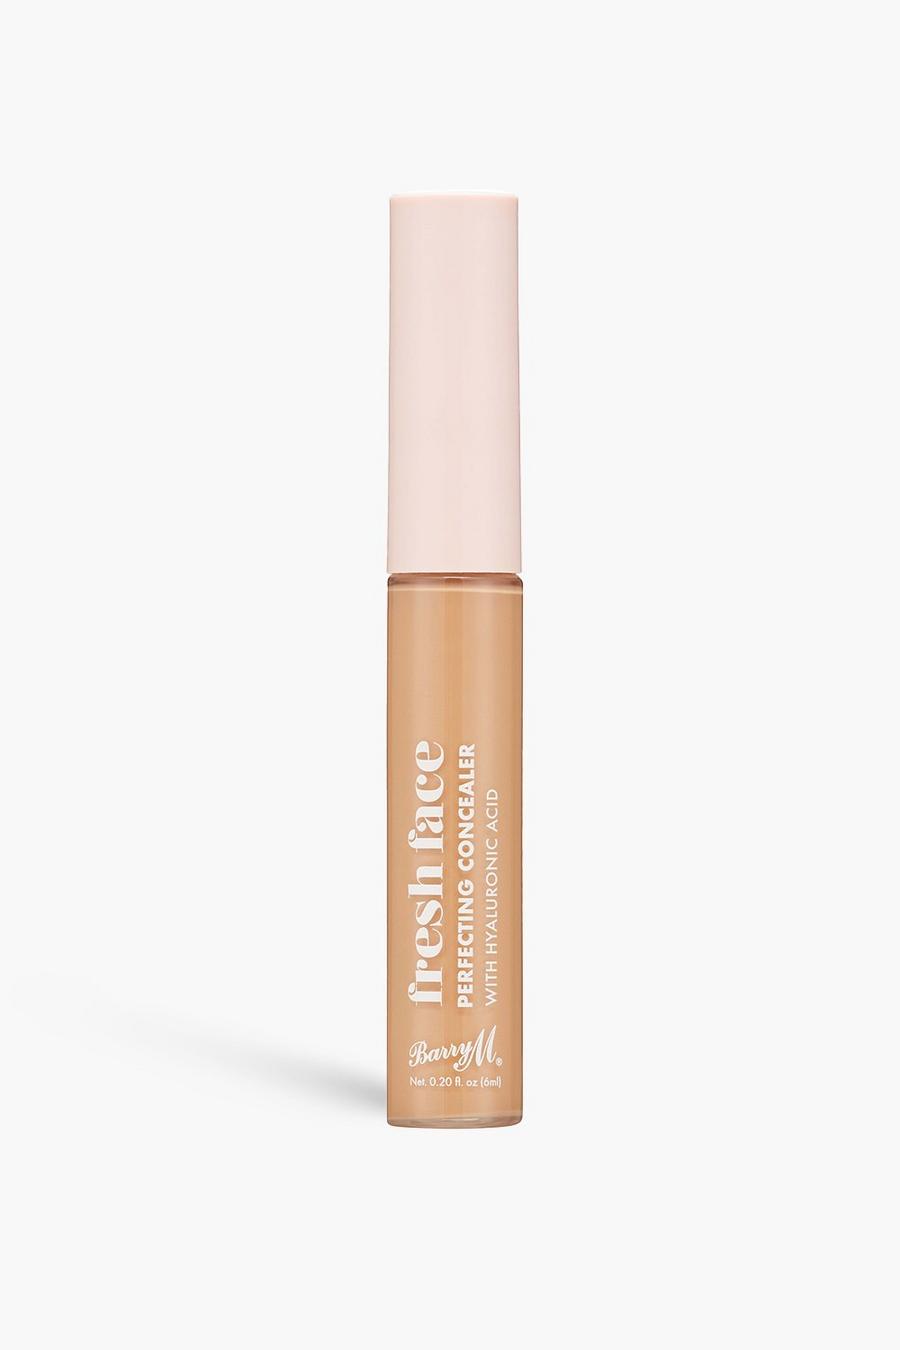 Tan brown Barry M Fresh Face Perfecting Concealer 6